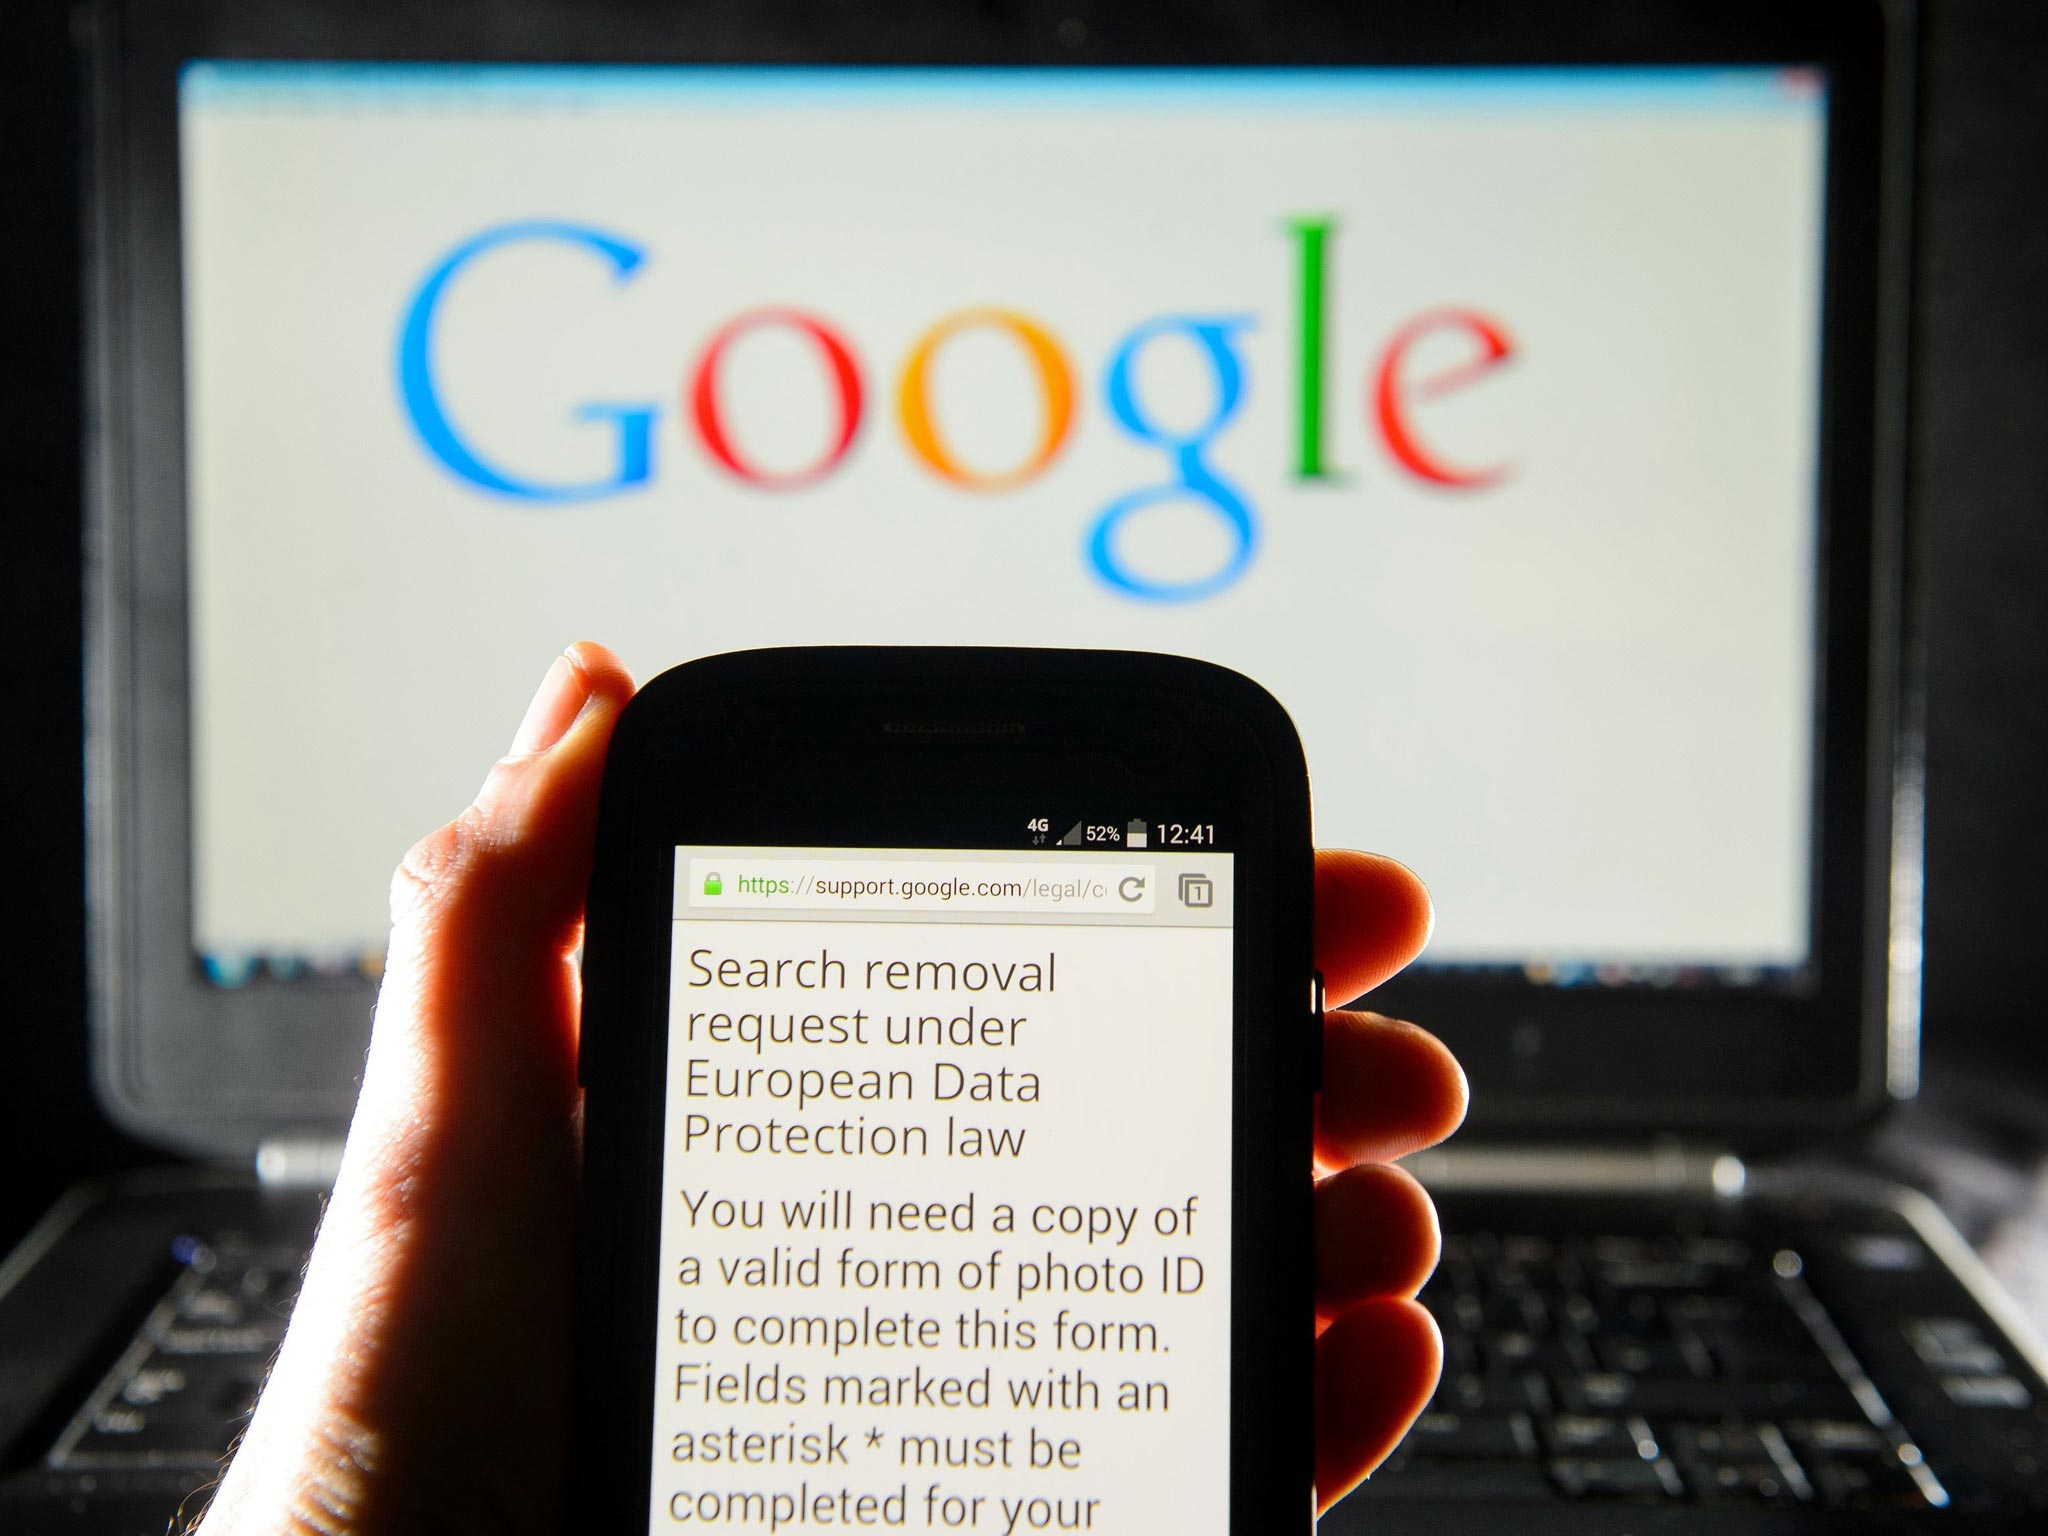 A Google search removal request on the screen of a
smartphone